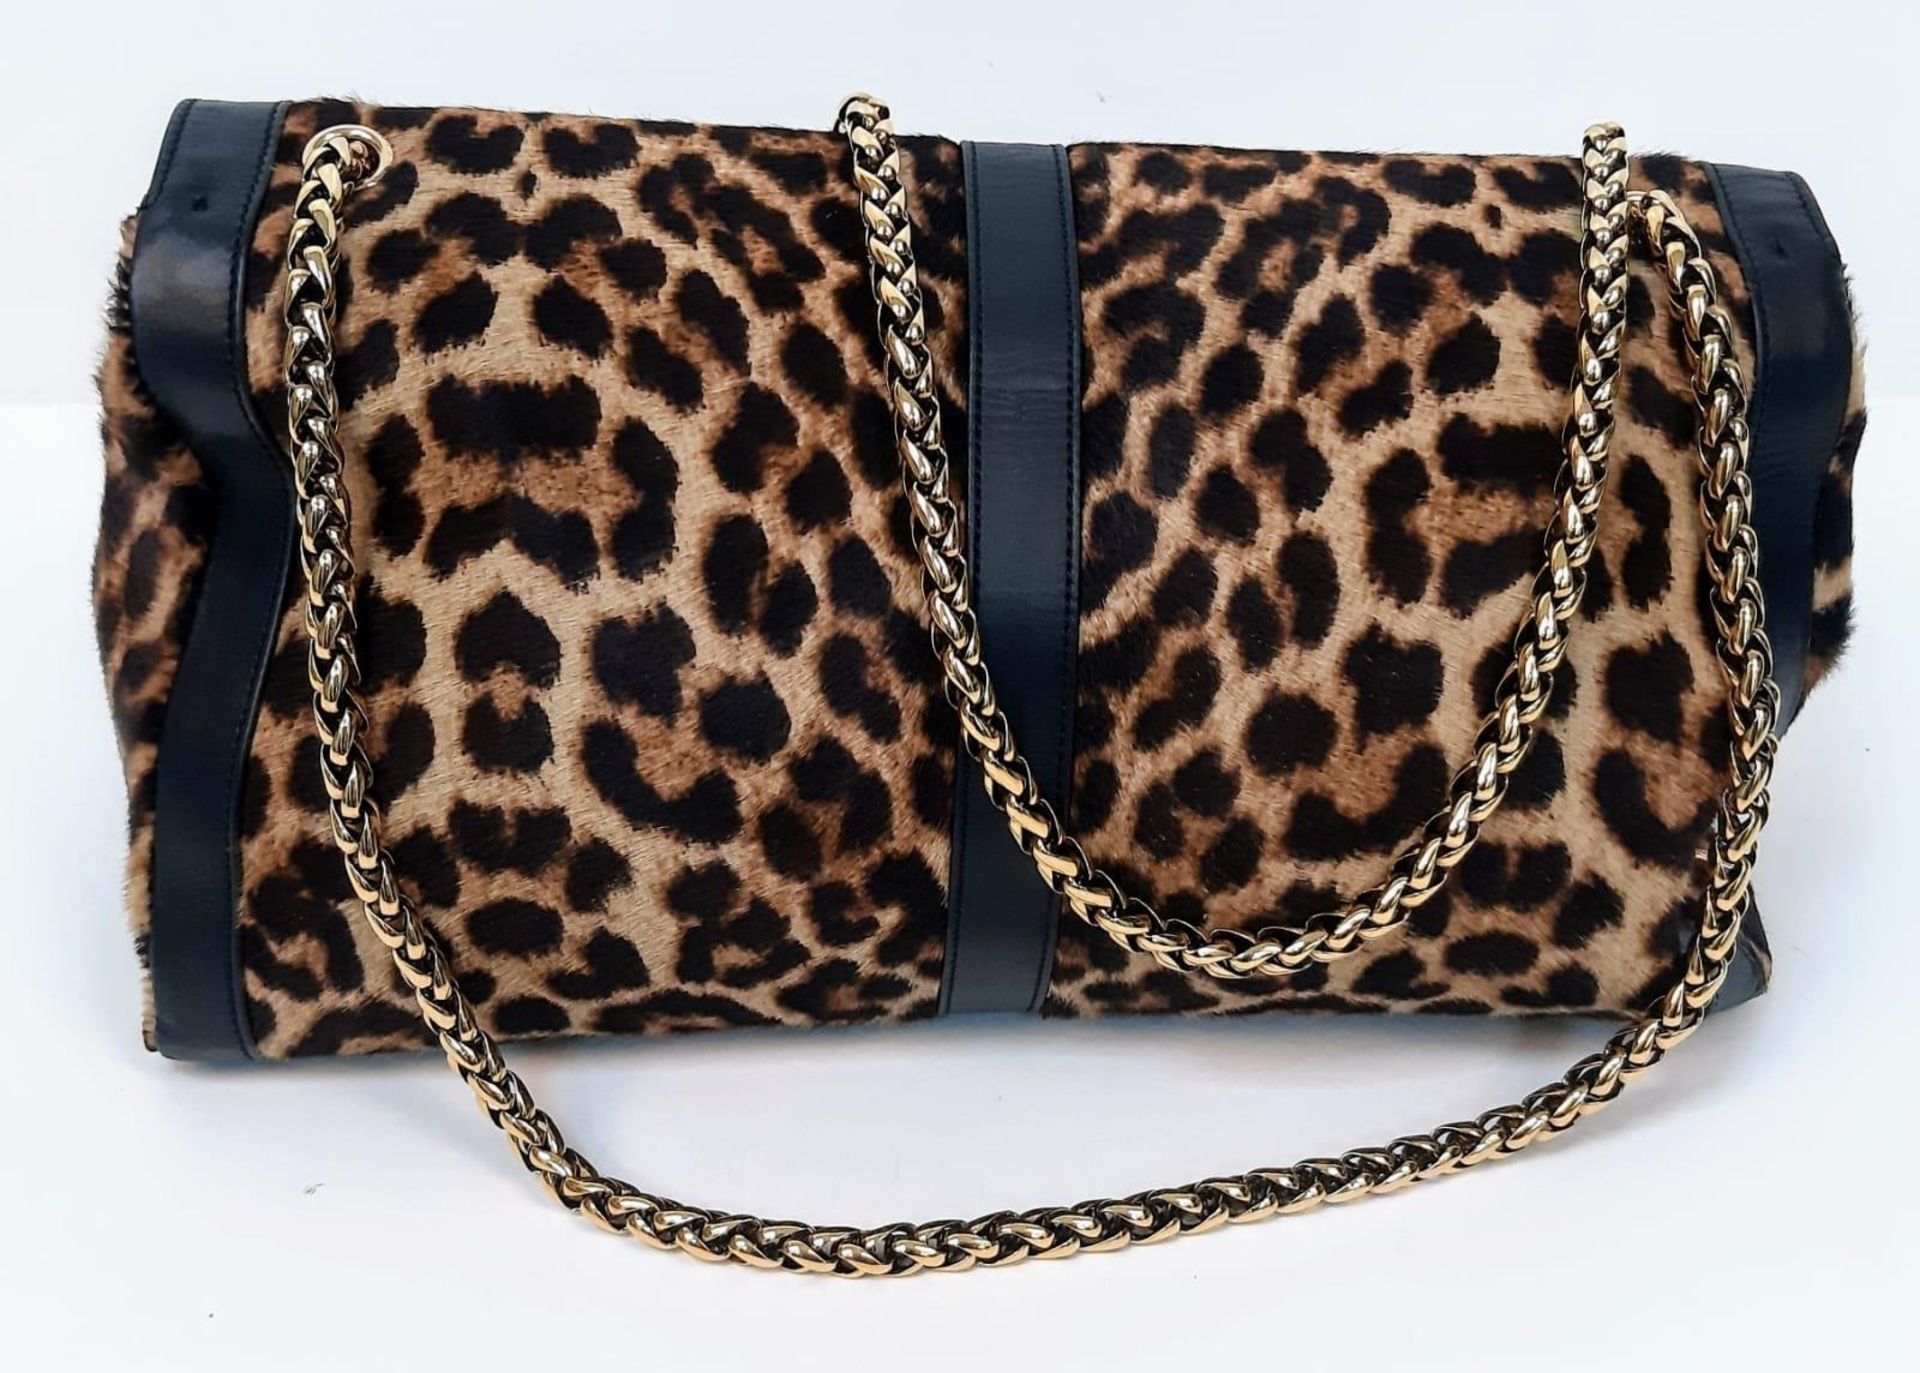 A Christian Louboutin Sweet Charity Leather and Leopard Print Pony Hair Shoulder Bag. Gold tone - Image 3 of 6